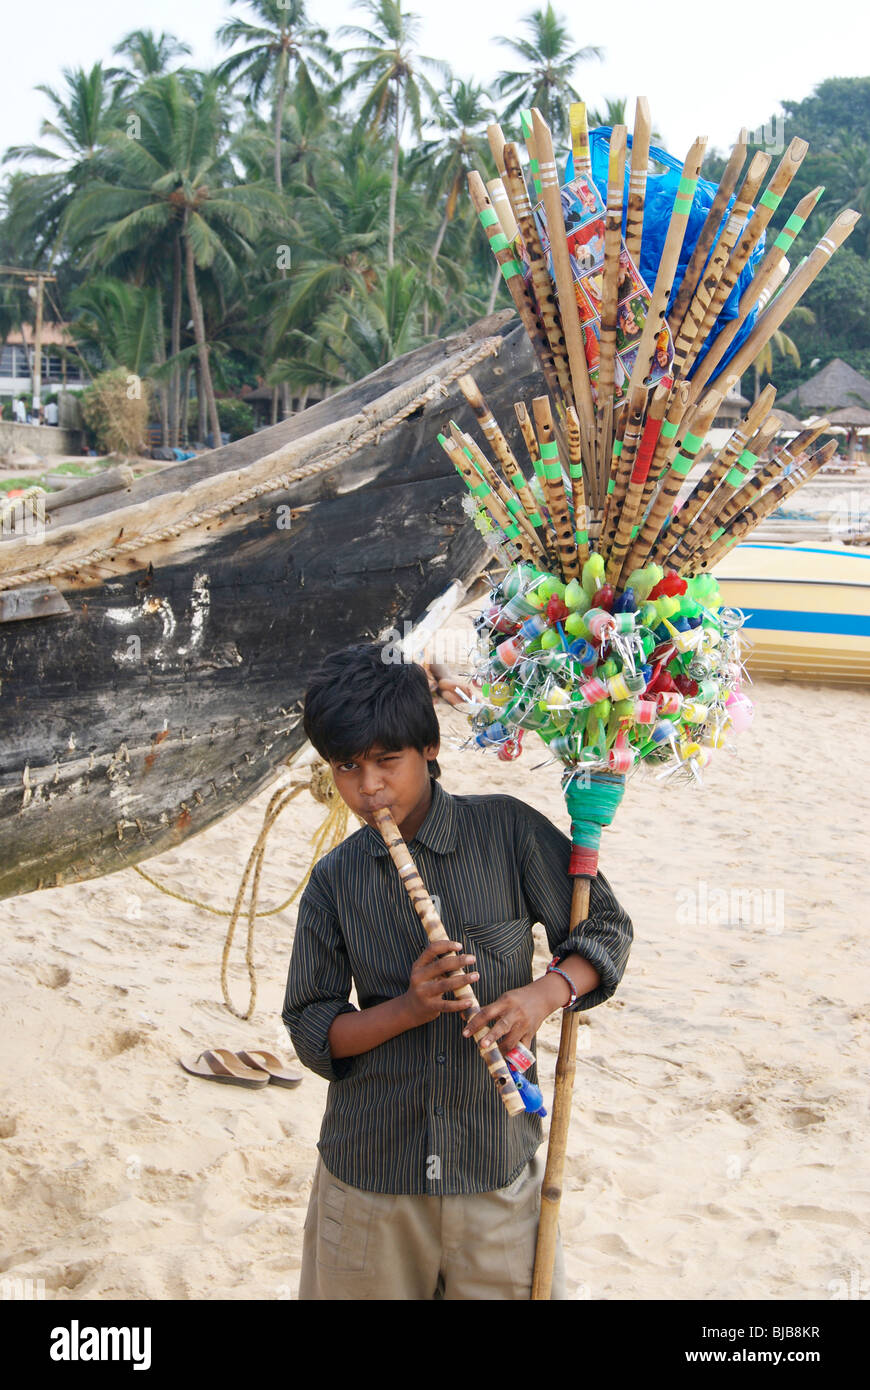 A Poor Flute Seller Boy playing his Flute in the Hard Noon time at Kovalam Beach Shore.A Typical Child Labor Scene from India Stock Photo